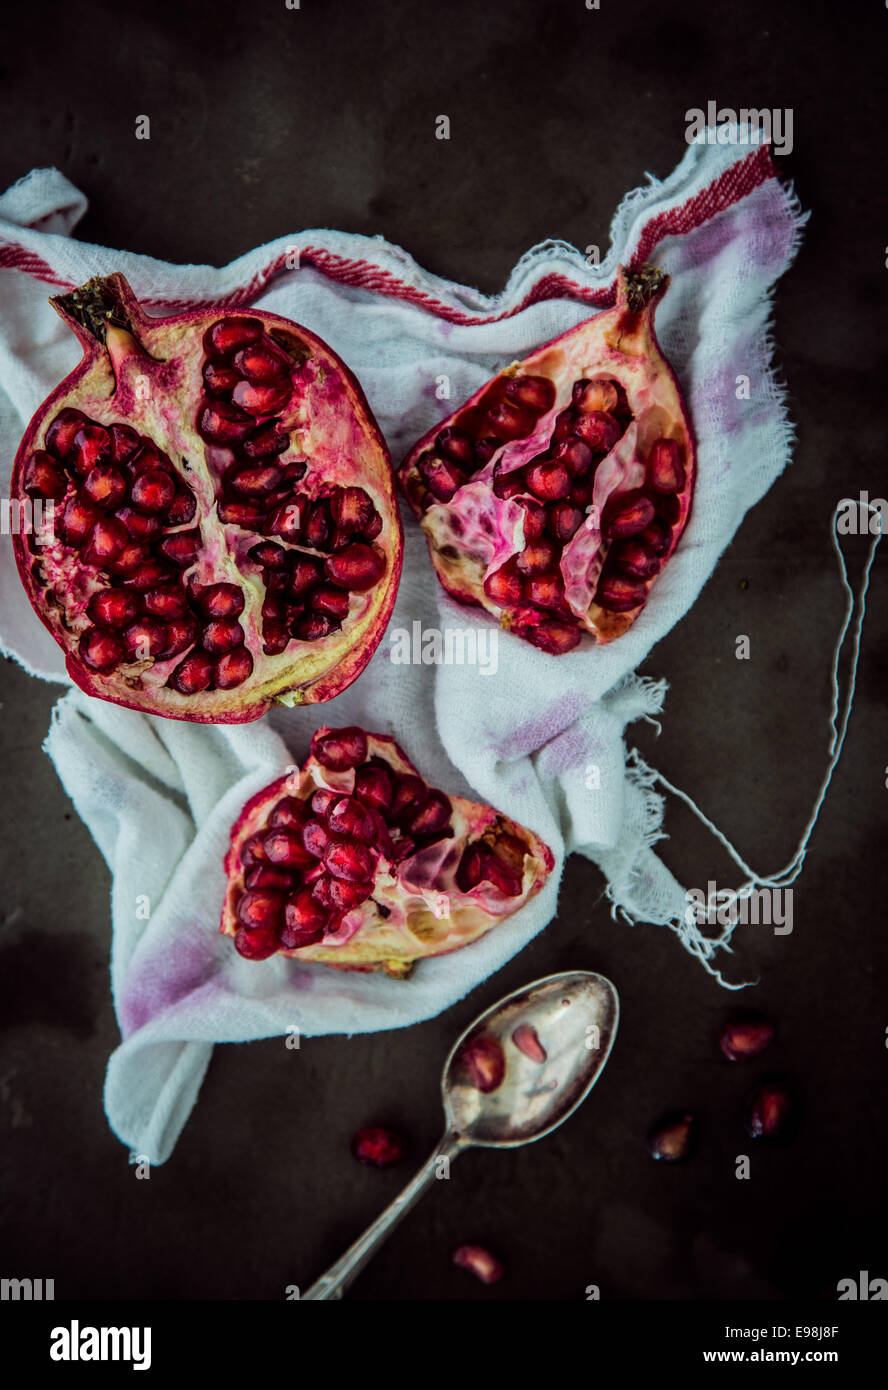 Broken open fresh pomegranate displaying the juicy ripe red seeds on a cloth stained by juice, overhead view Stock Photo